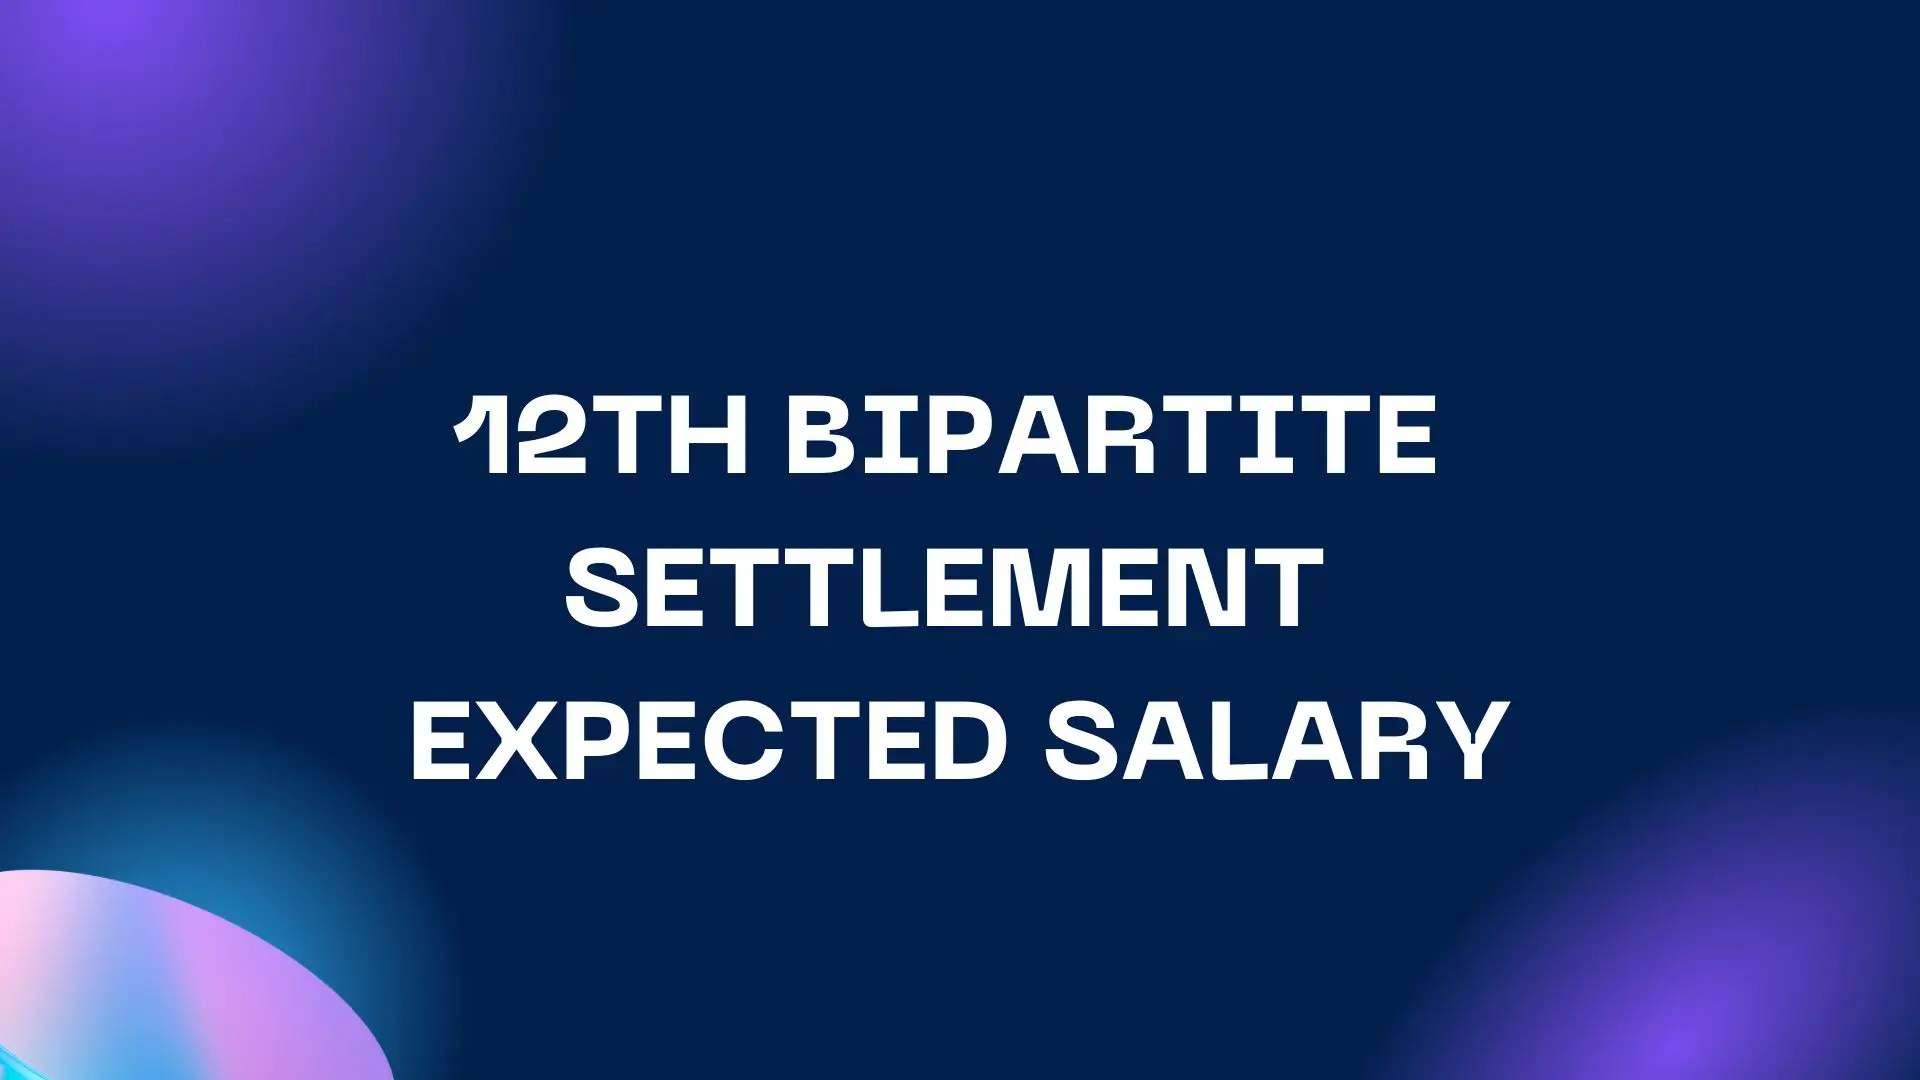 12TH BIPARTITE SETTLEMENT EXPECTED SALARY